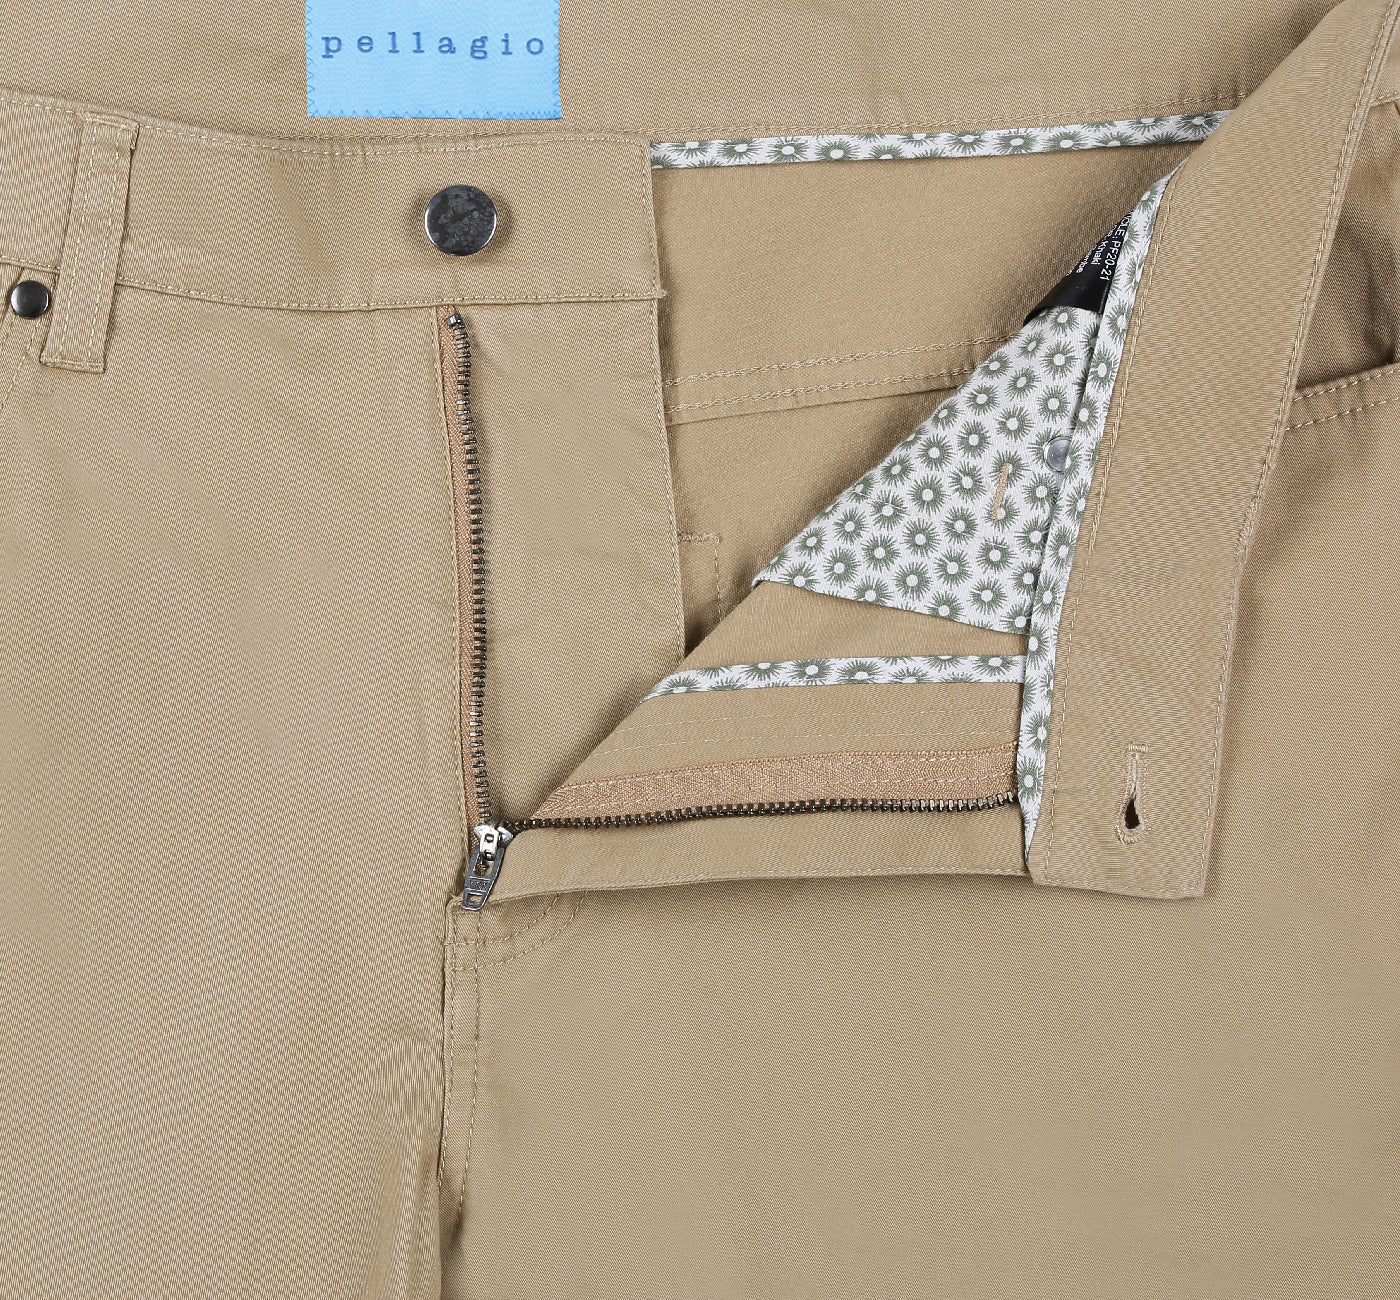 PF20-21 Men's 5-Pocket Tan Cotton Stretch Washed Flat Front Chino Pants